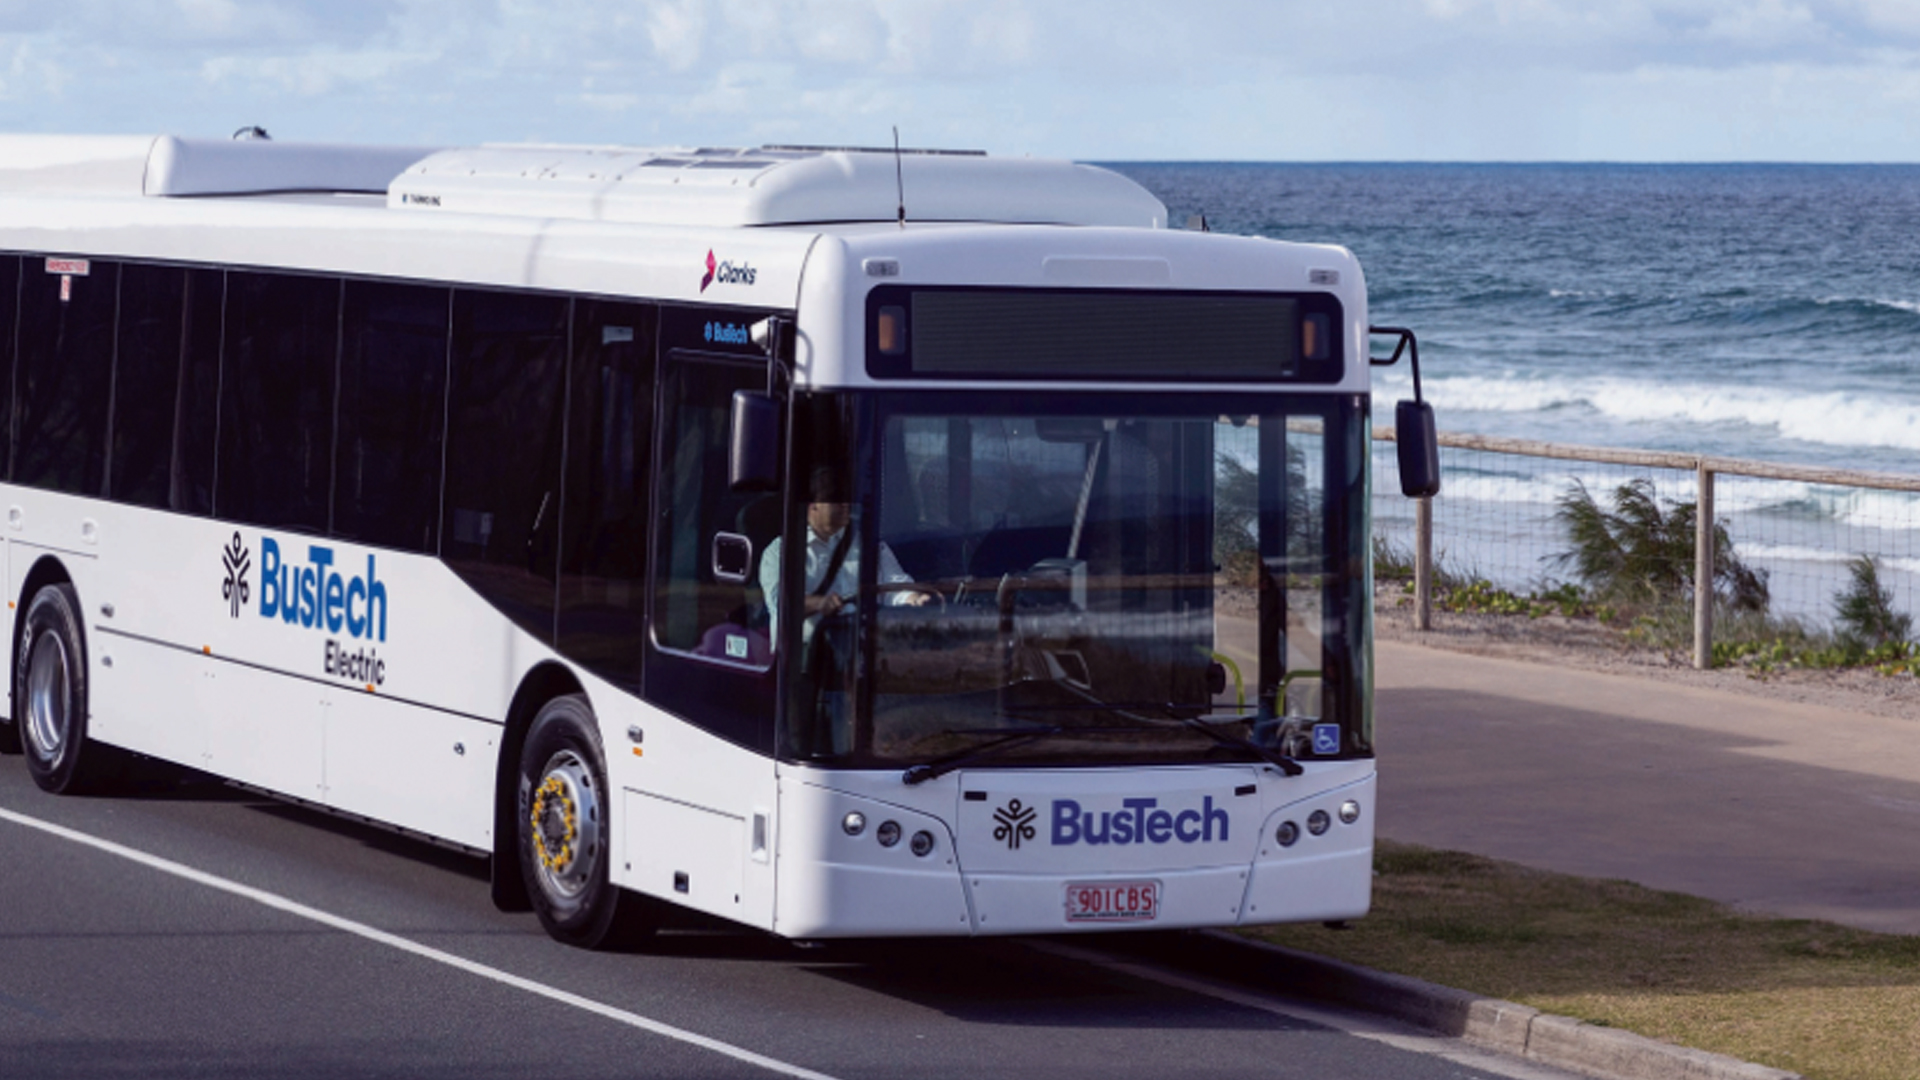 The BusTech ZDI-450 will be on show at the Australasia Bus and Coach Expo